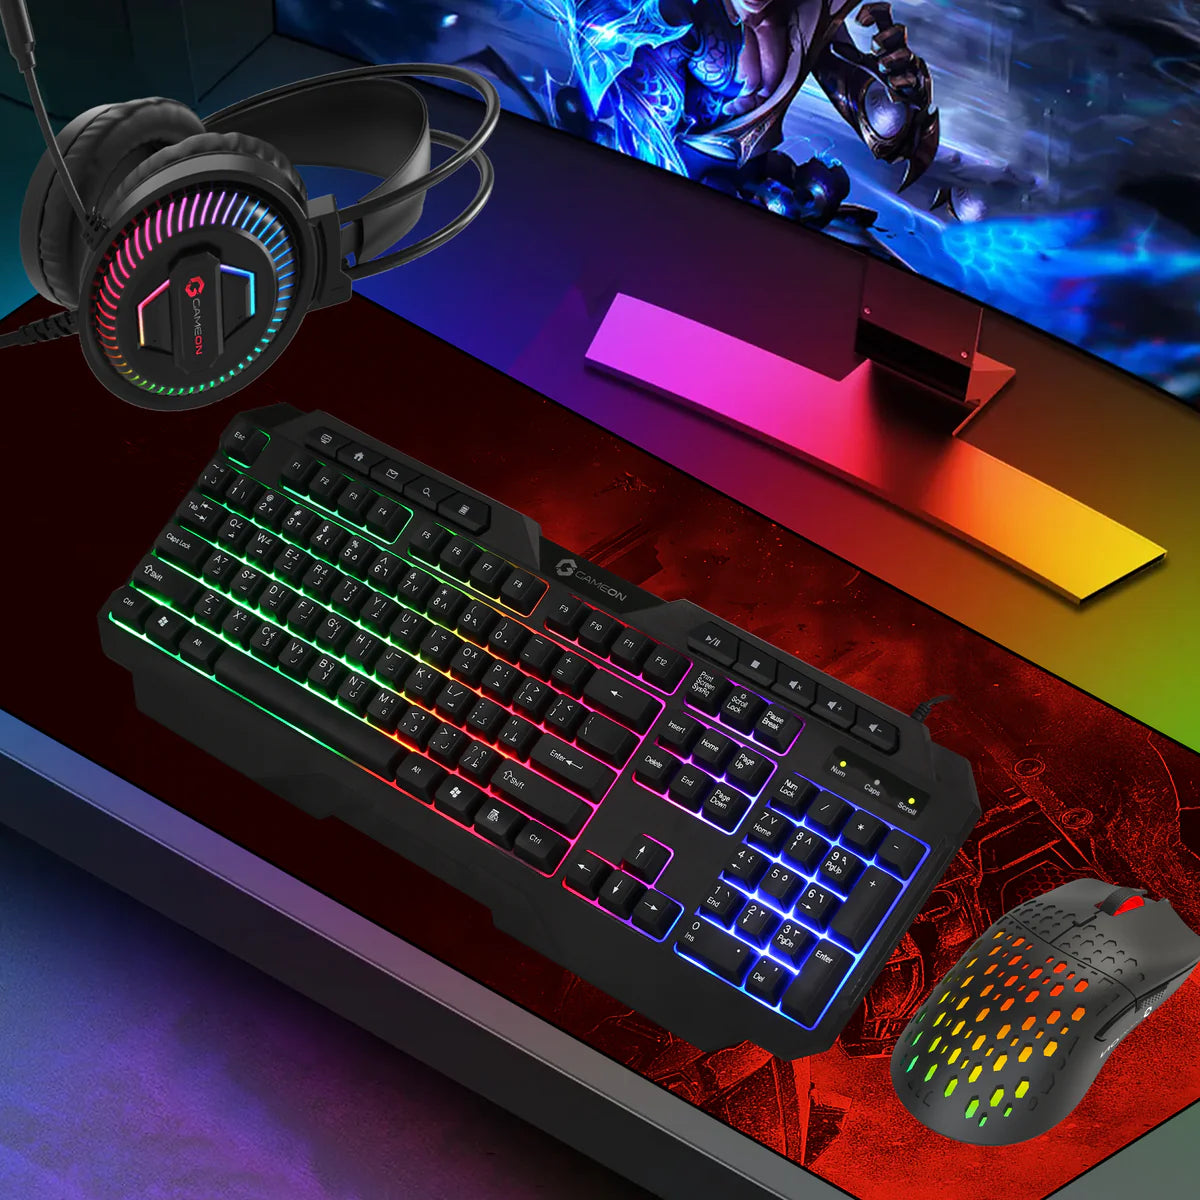 GAMEON CYPHER XL All-In-One Bundle (Keyboard, Headset, Mouse & Mousepad)